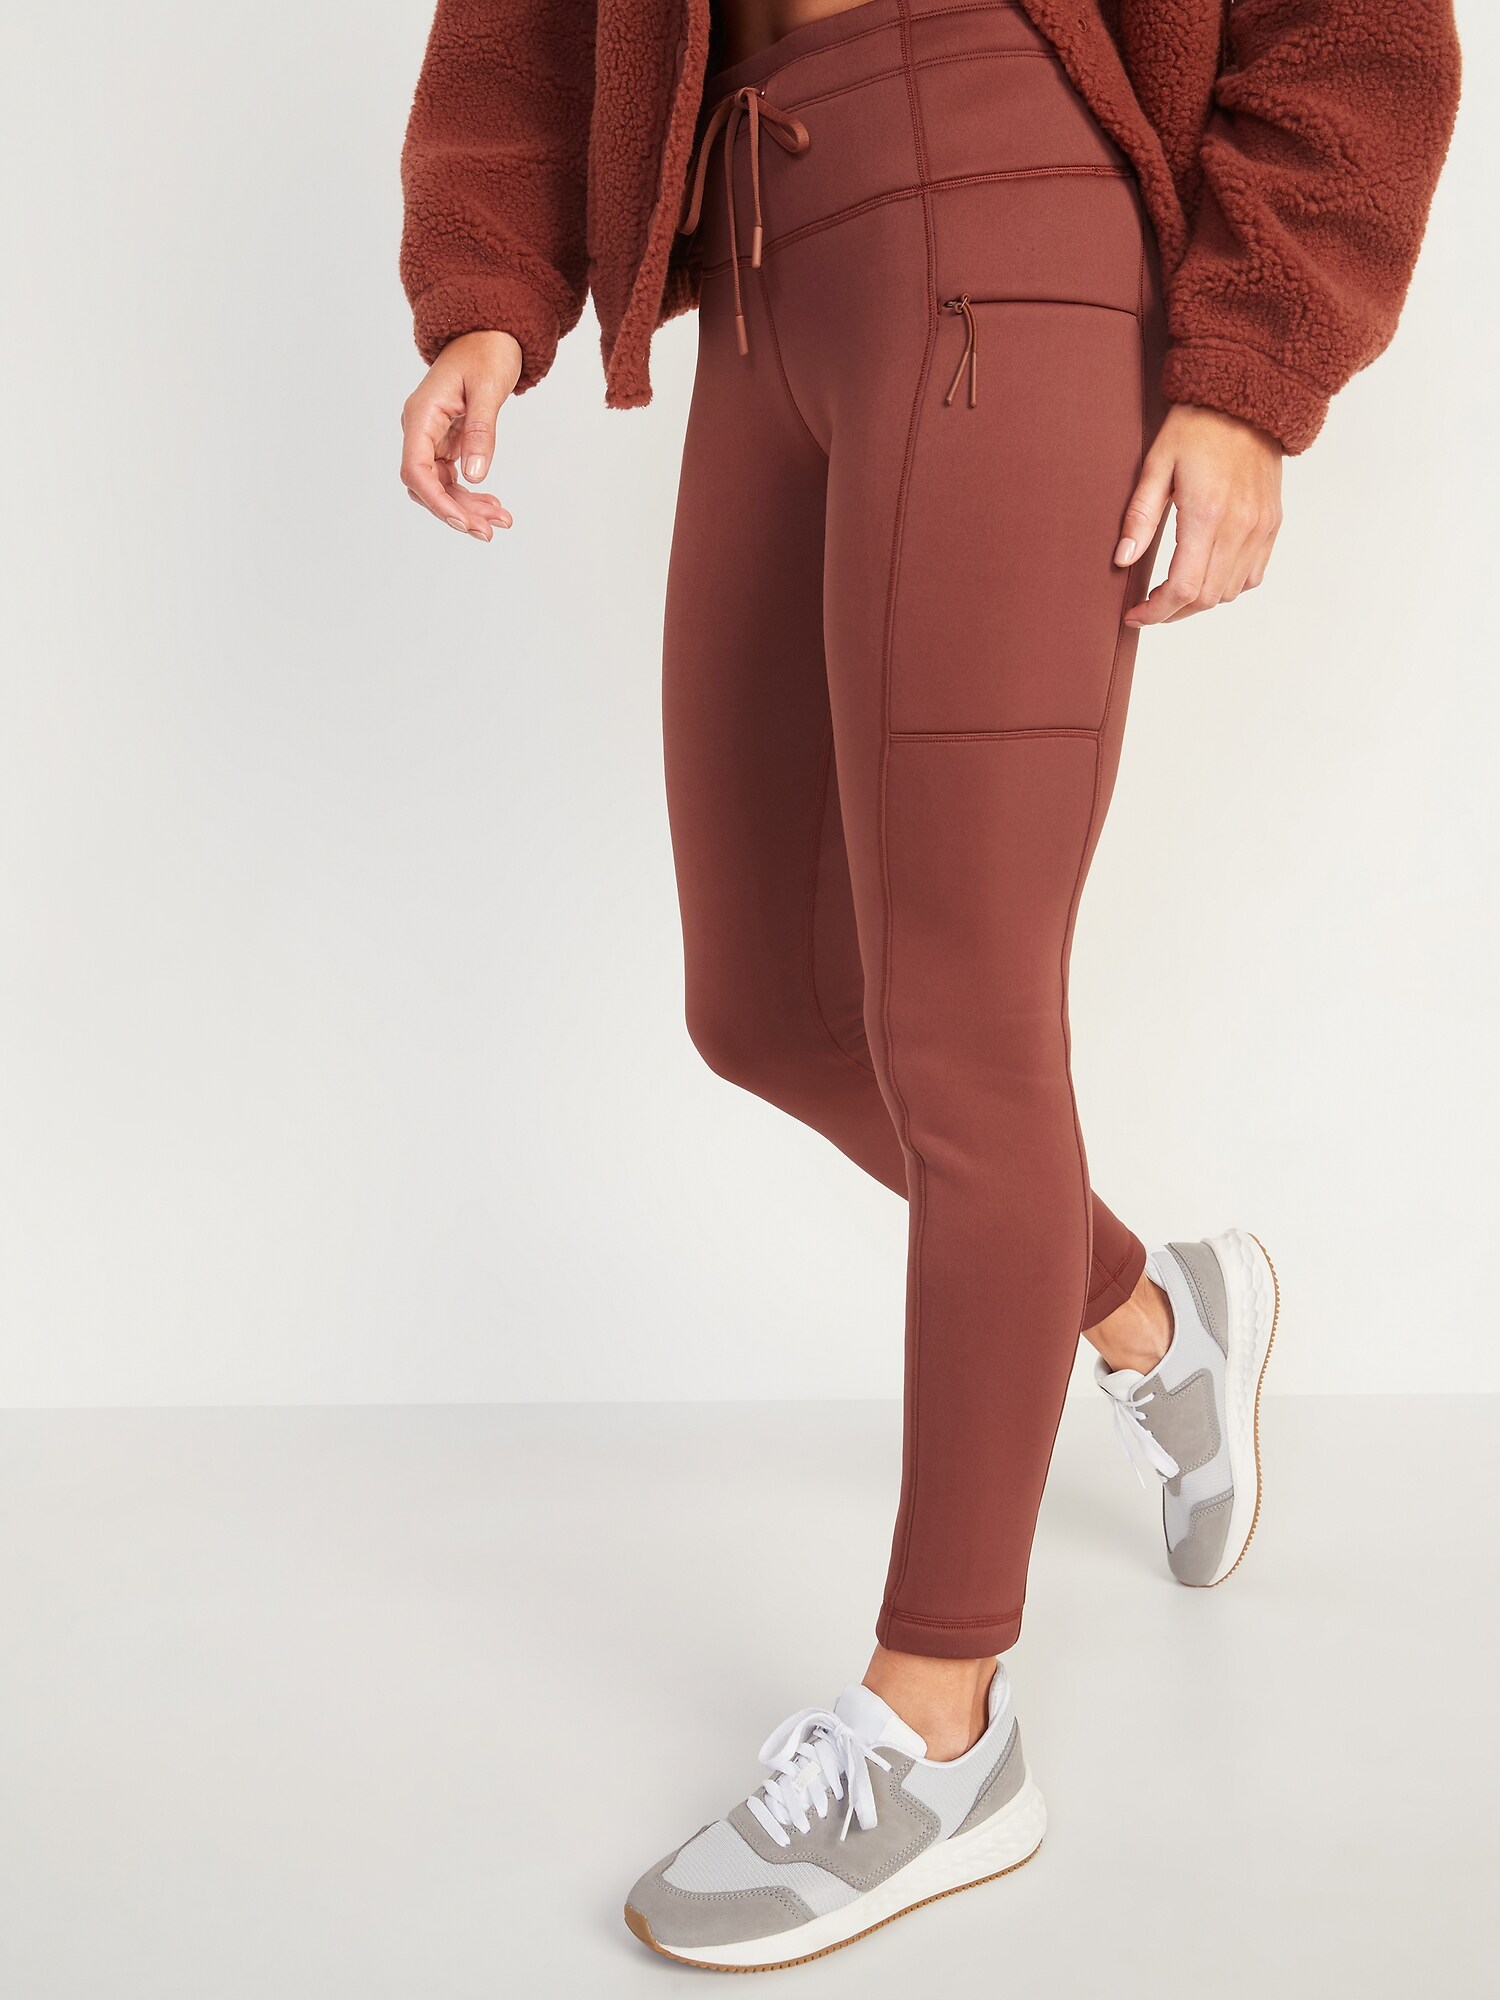 High-Waisted Built-In Warm Fleece-Lined Performance Leggings for